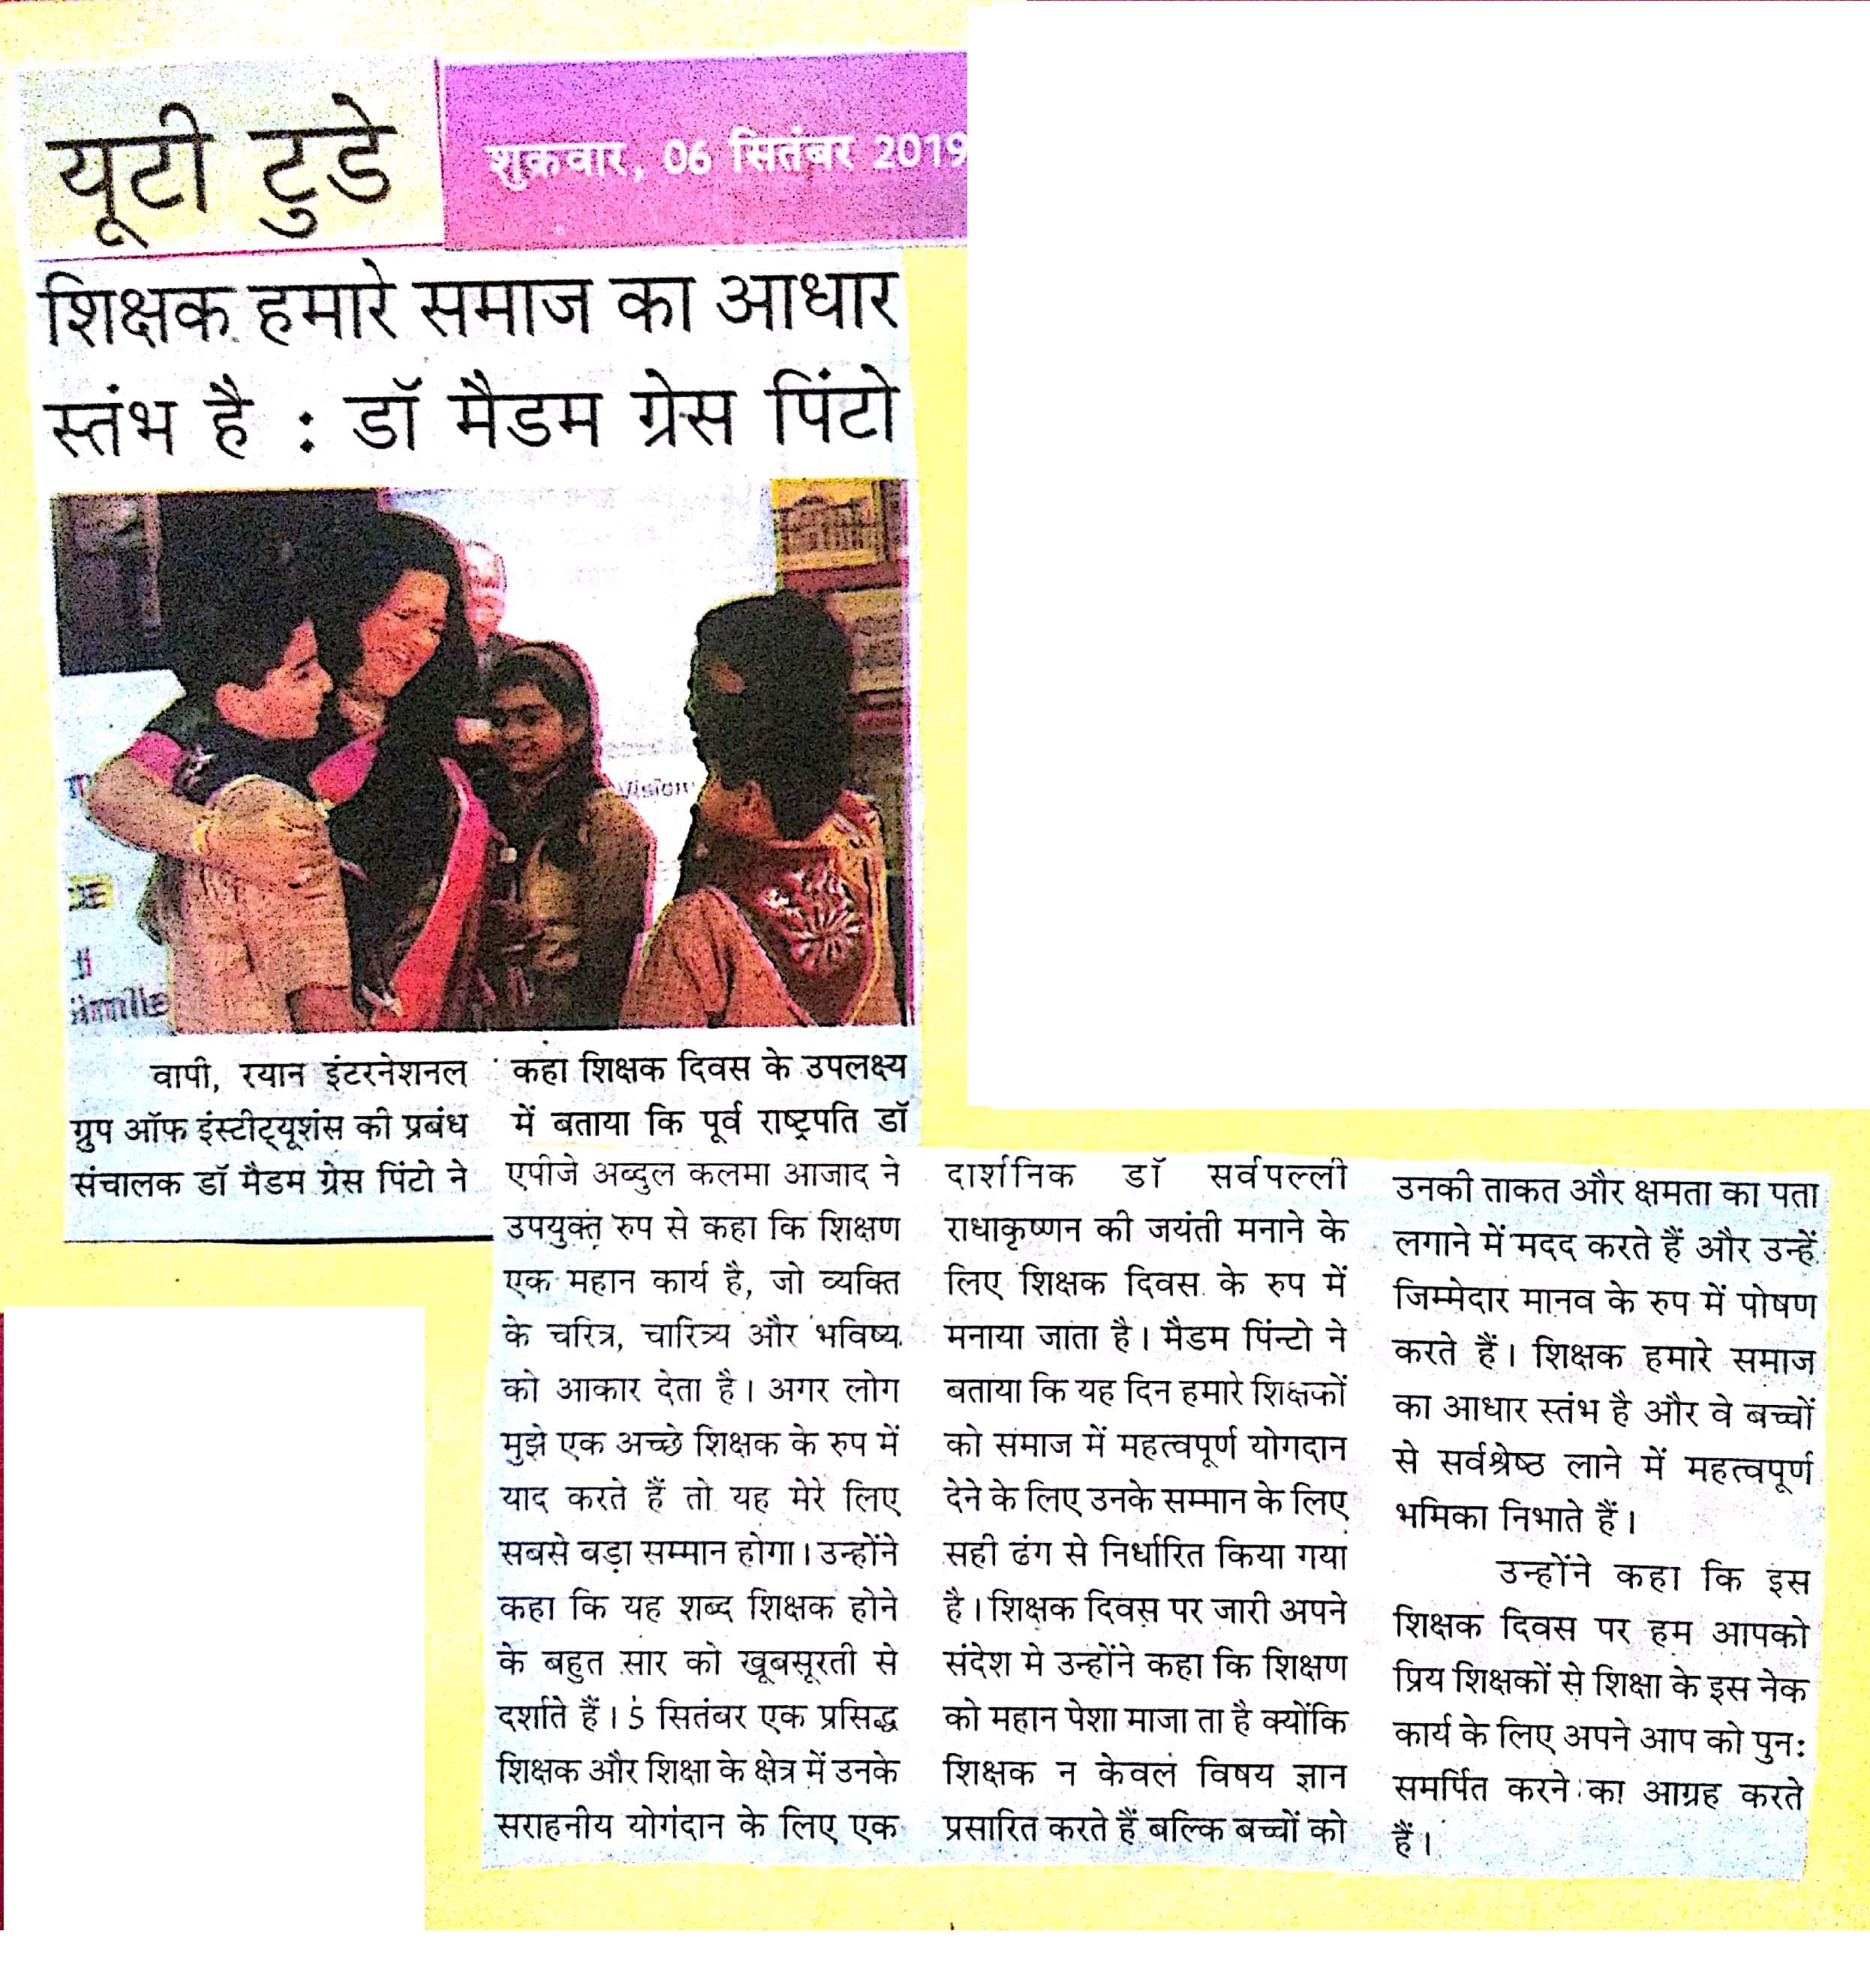 Madam’s Message On Teacher’s Day Celebrations Was Featured In U.T. Today